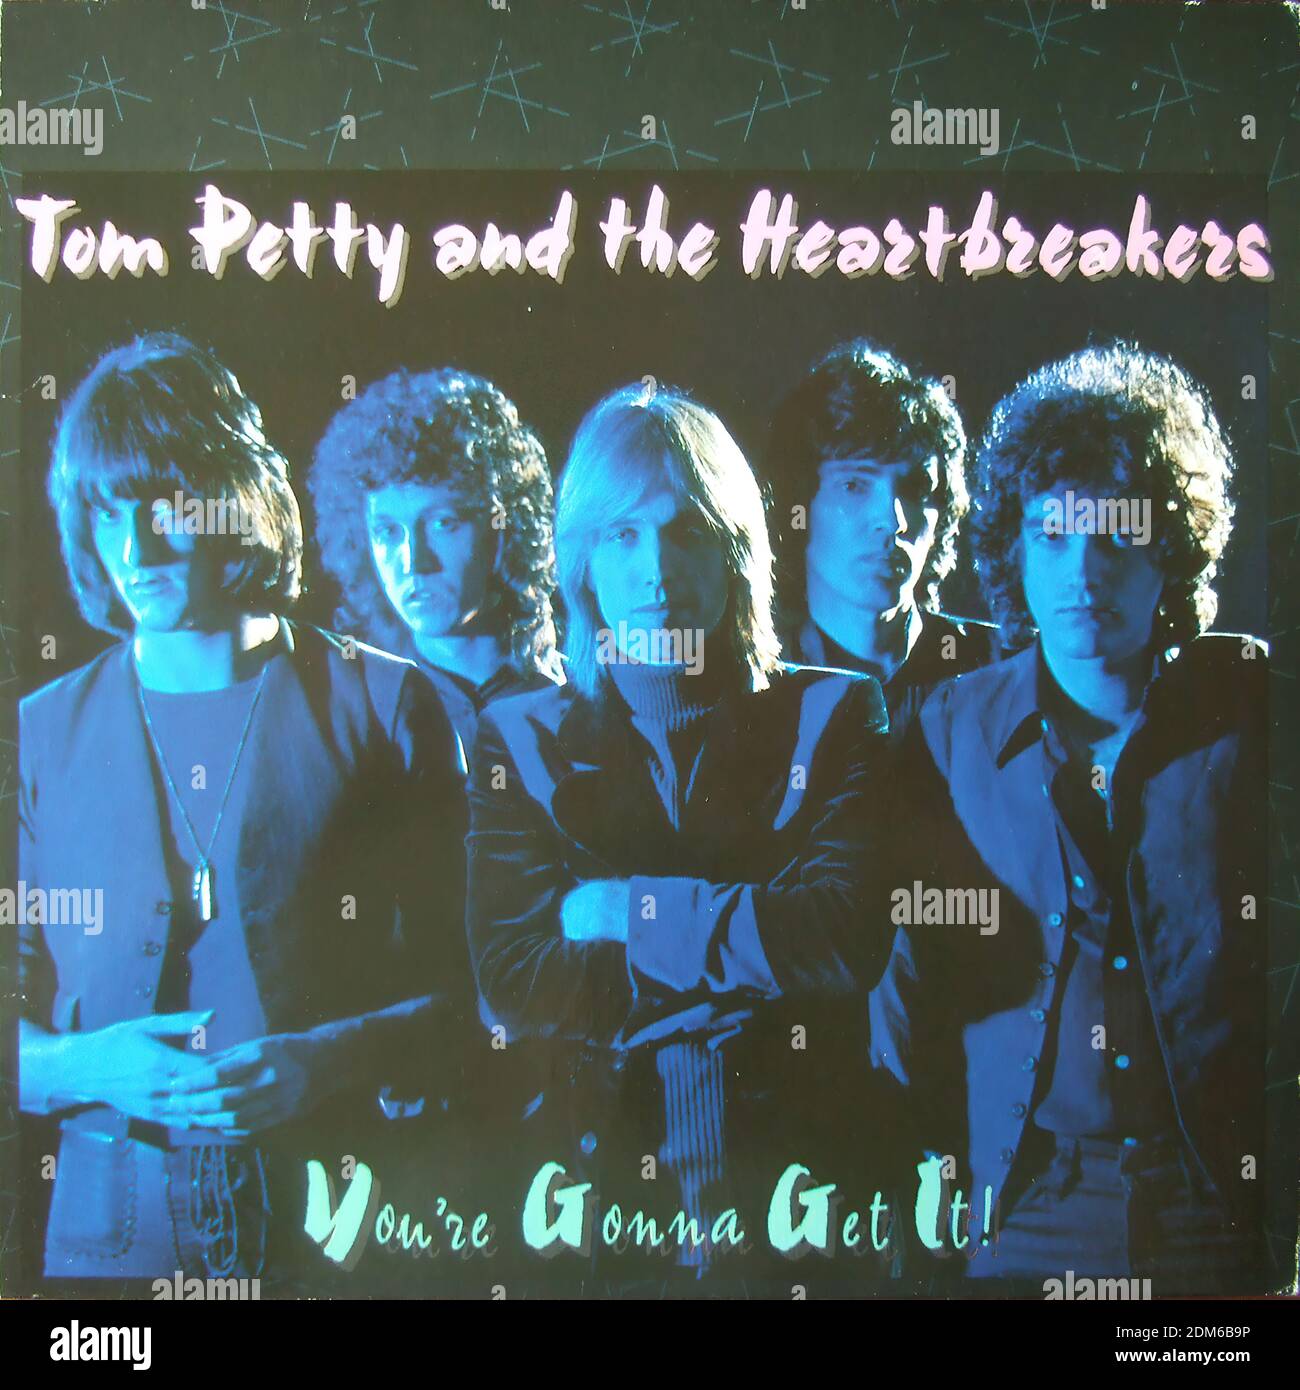 Tom Petty & The Heartbreakers - You're Gonna Get It! - Vintage vinyl album cover Stock Photo